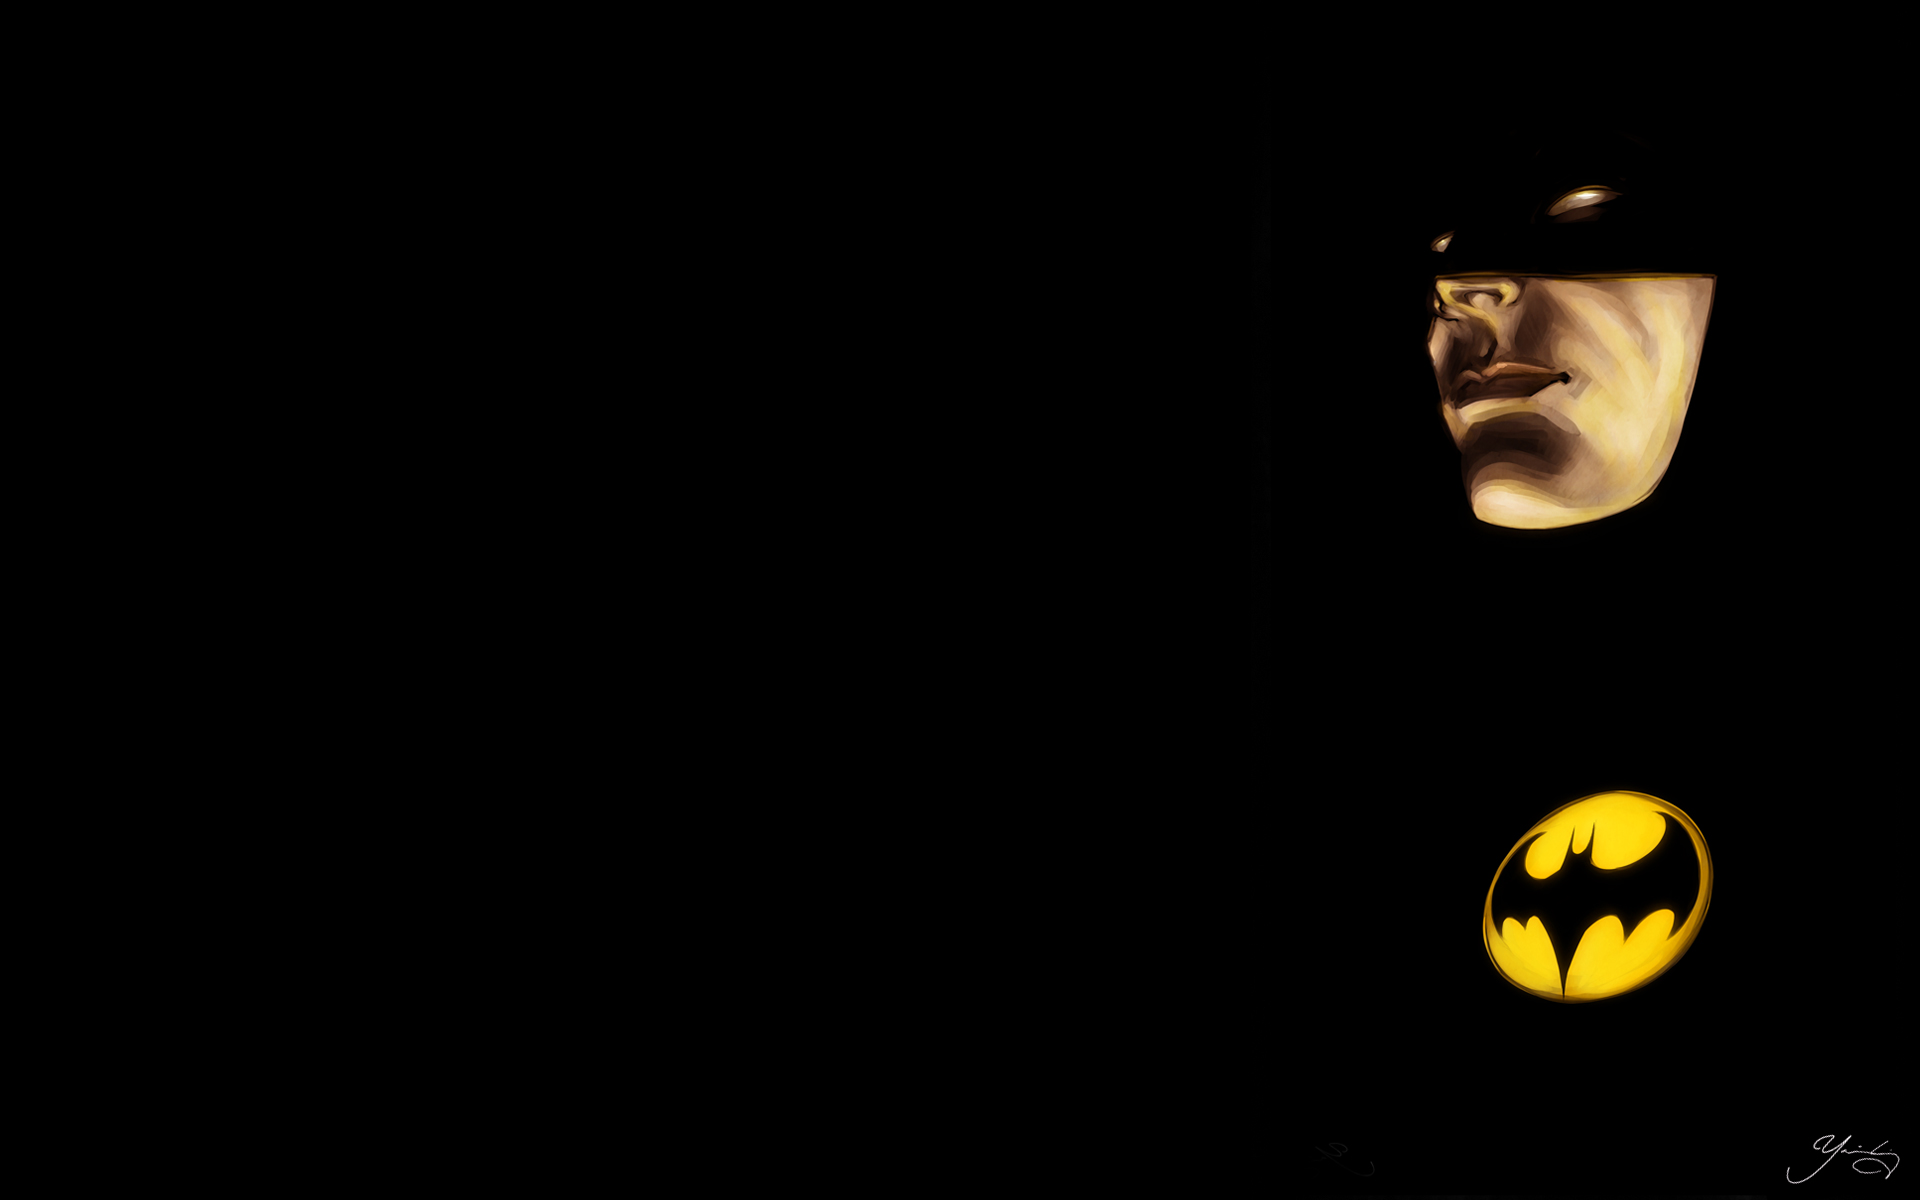 sharing these Batman logo wallpapers with you. We liked the wallpaper 